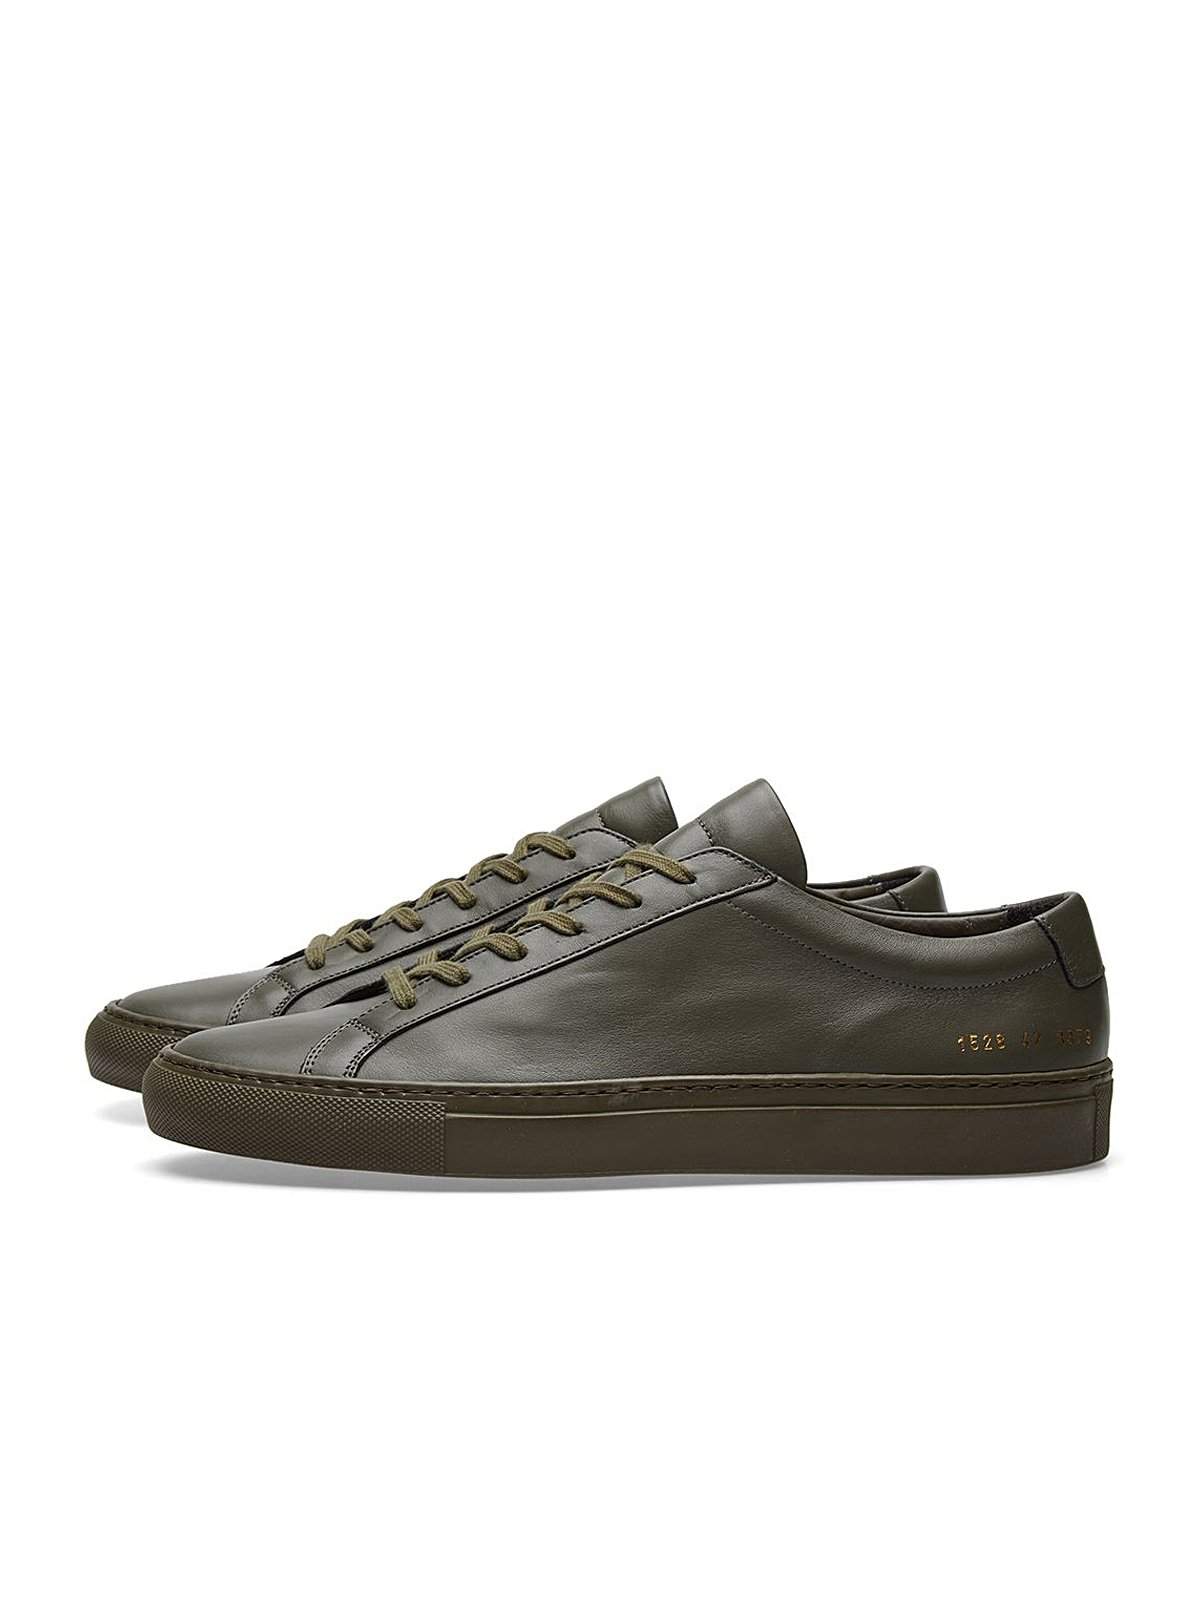 Common Projects Original Achilles Low Army Green - MORE by Morello Indonesia